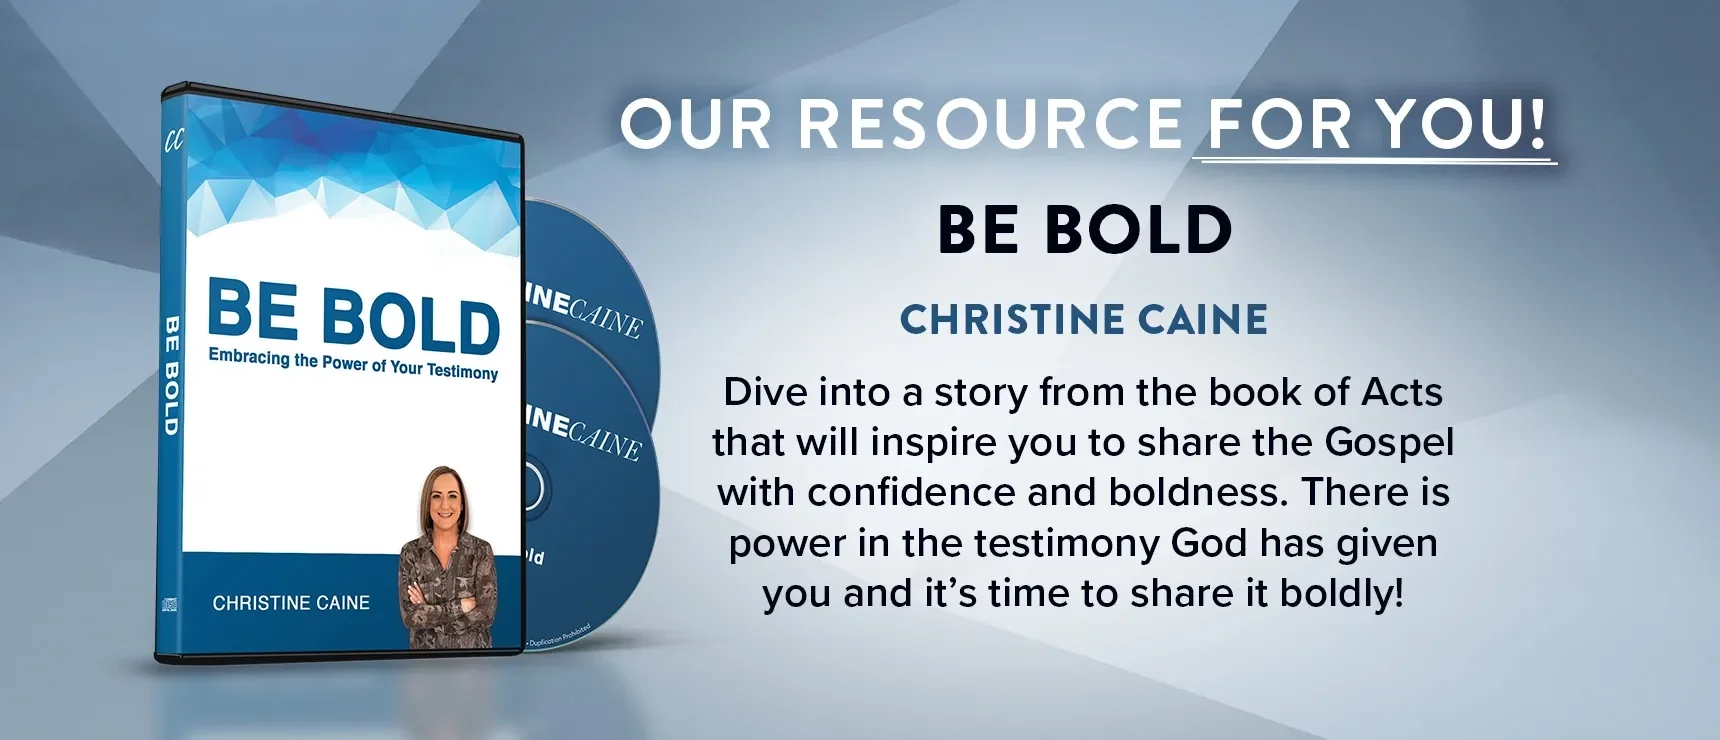 Be Bold by Christine Caine